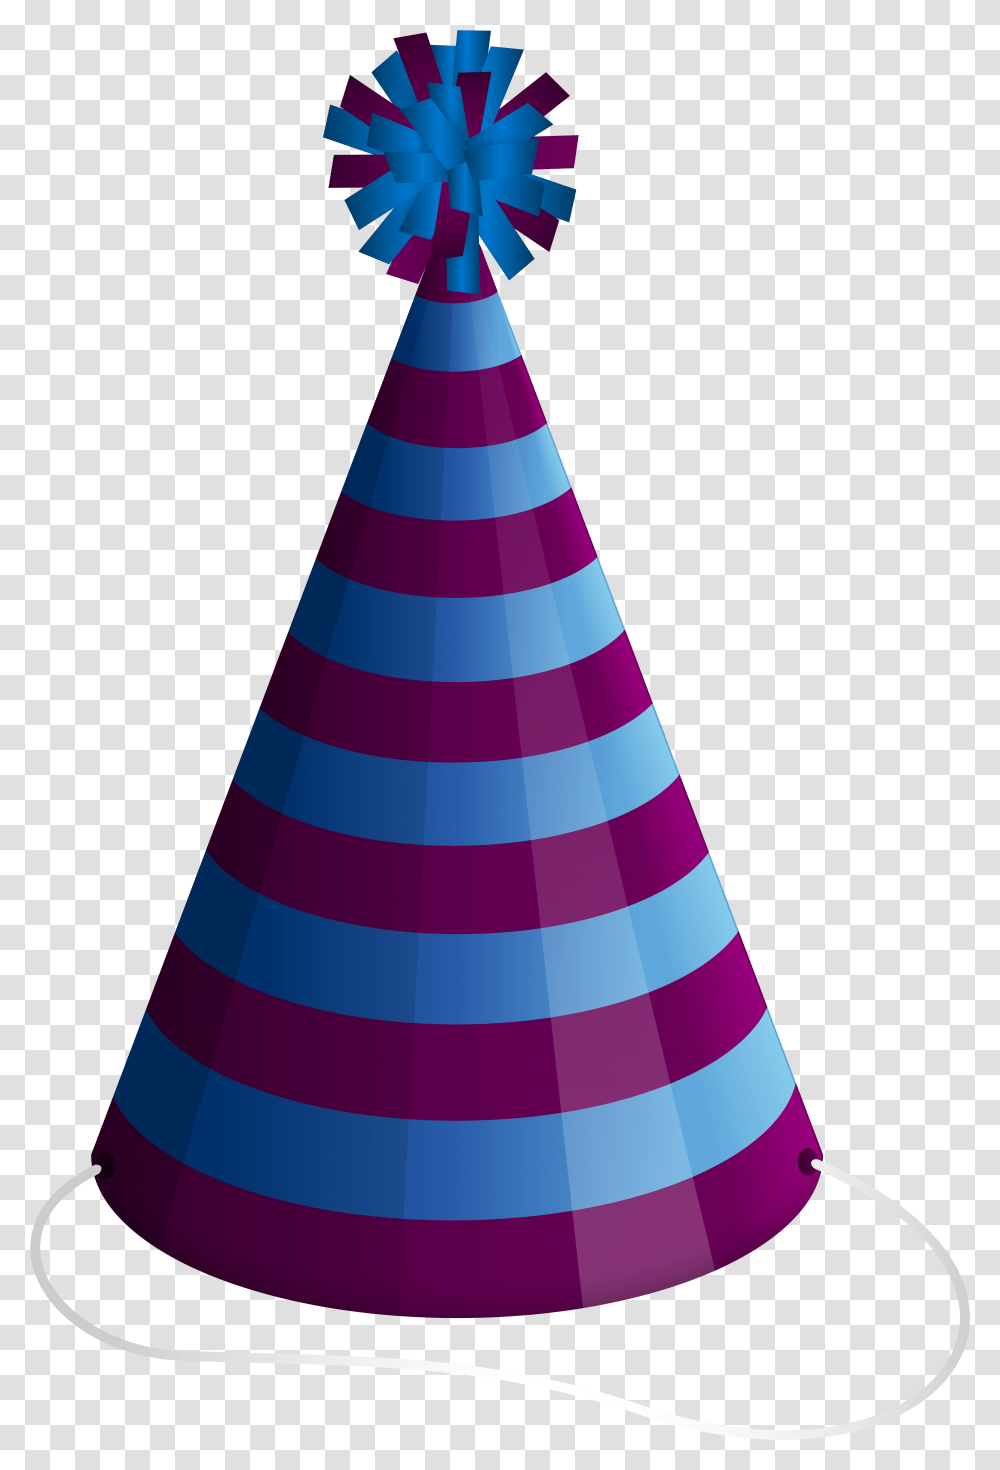 Blue Birthday Hat Clipart Background Party Hats, Apparel, Cone Transparent Png